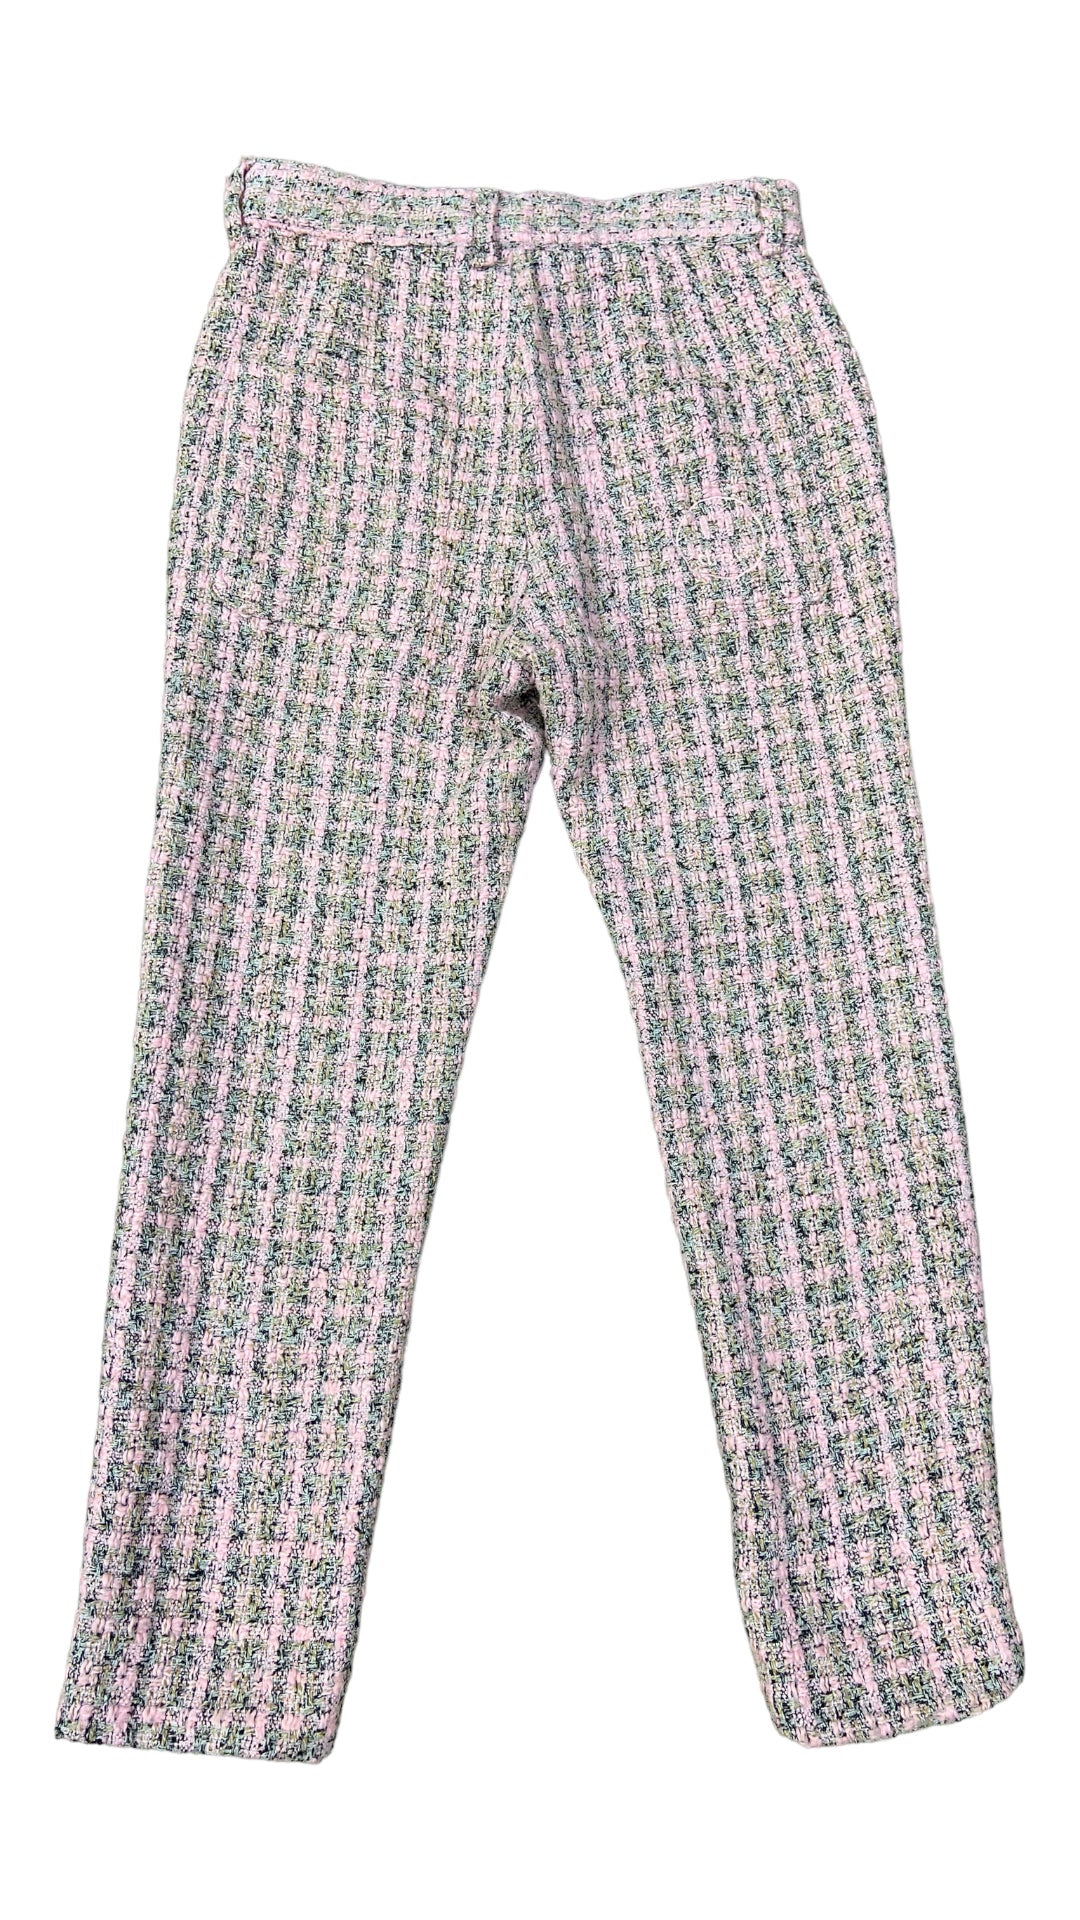 Preowned Drew House Pink Boucle Trousers Sz 32x28